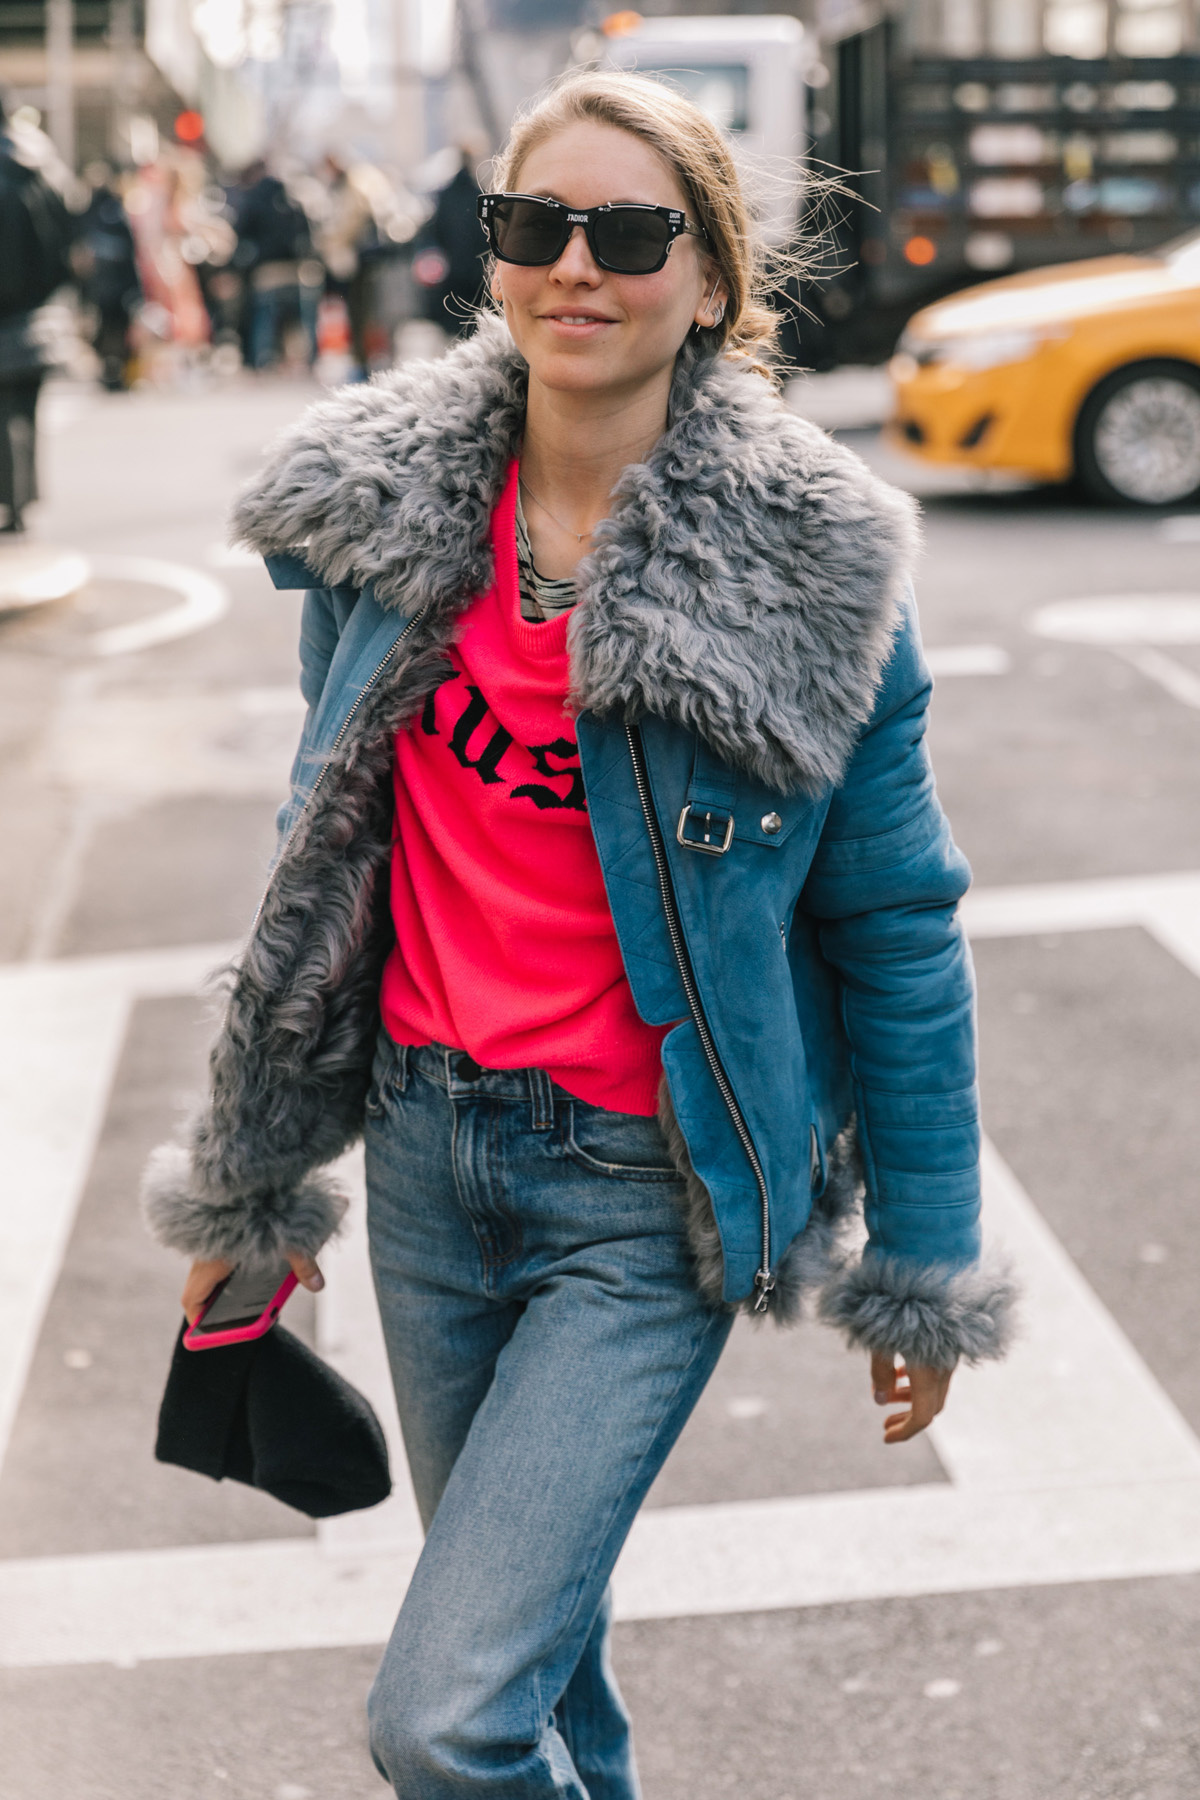 At NYFW they wear... Shearlings! - Blue is in Fashion this Year